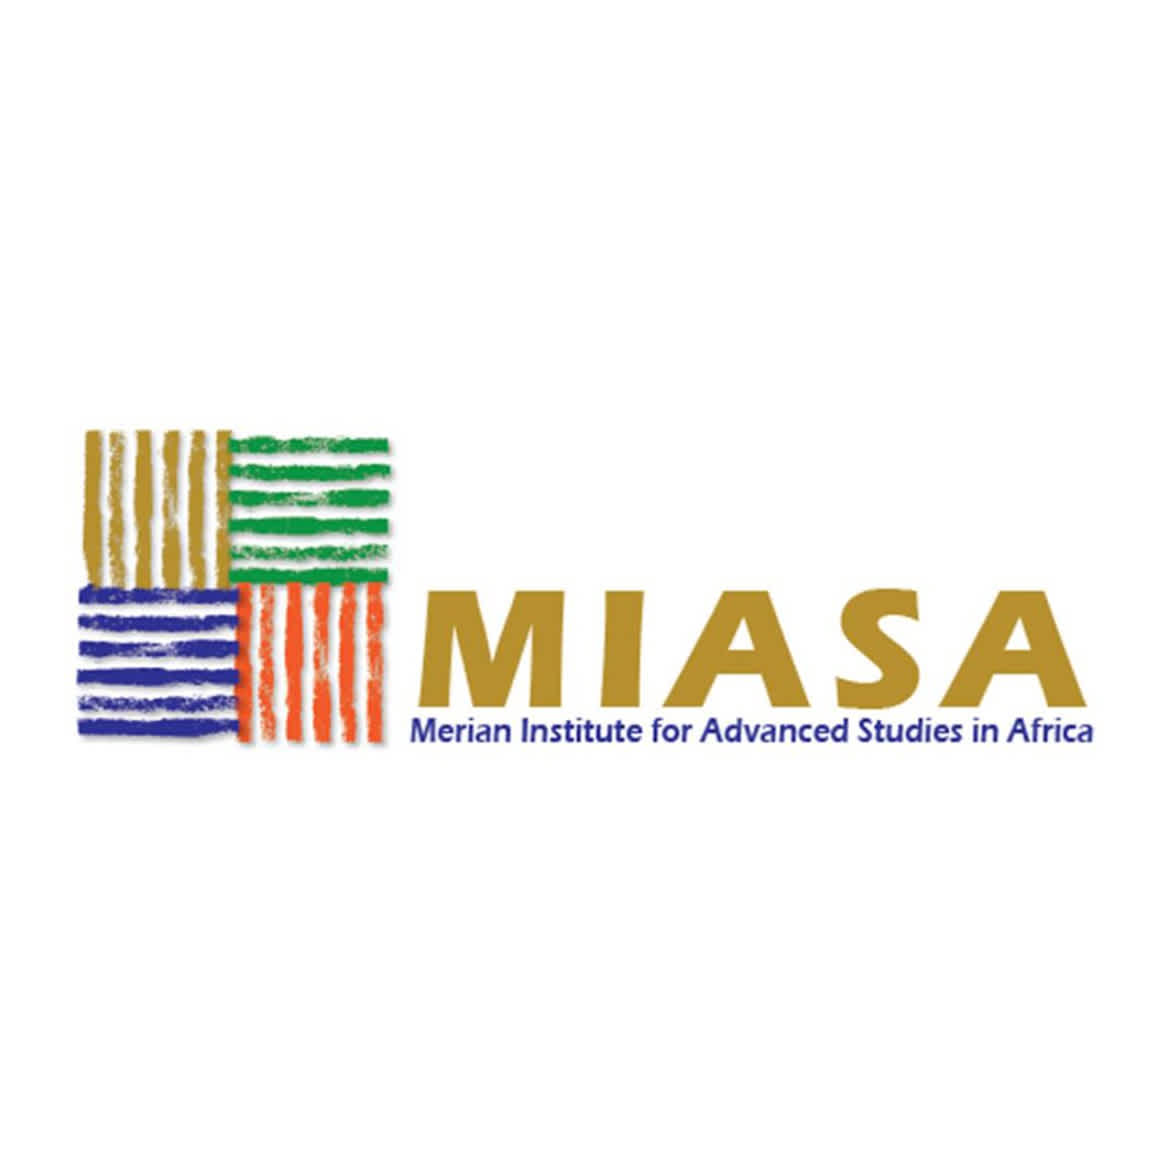 Call for Papers and Organised Sessions: MIASA Policy Conference “Policies for a Sustainable Rural Transformation in Africa”